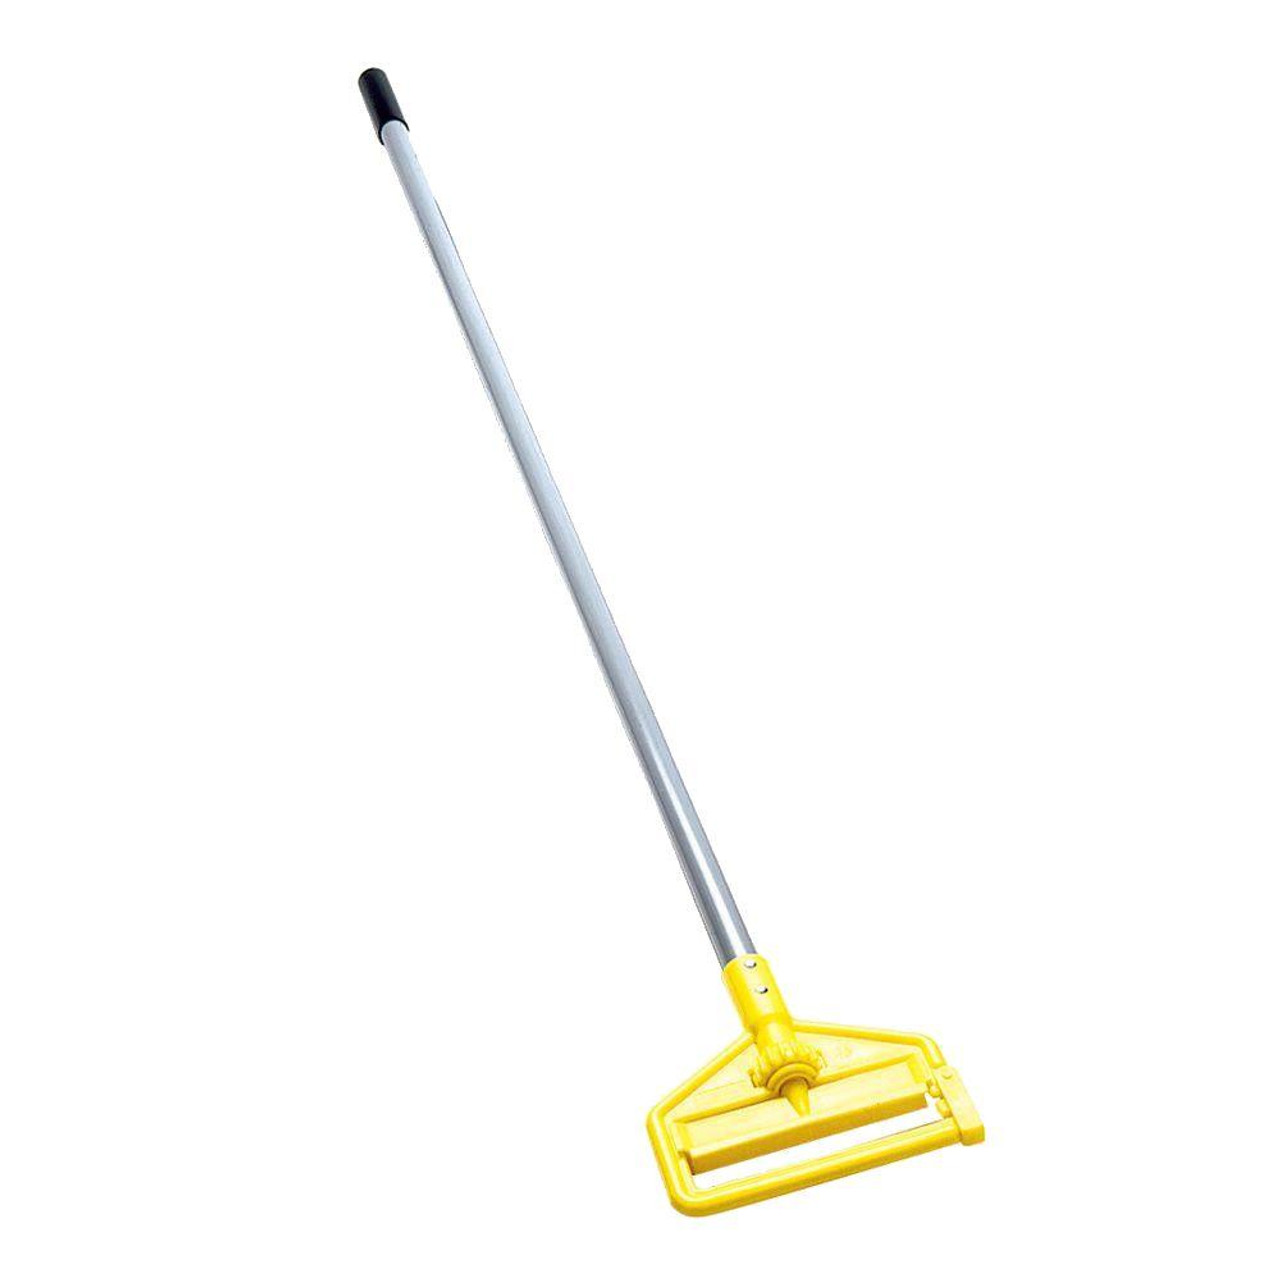 Rubbermaid Invader Mop Handle - FGH14600GY00